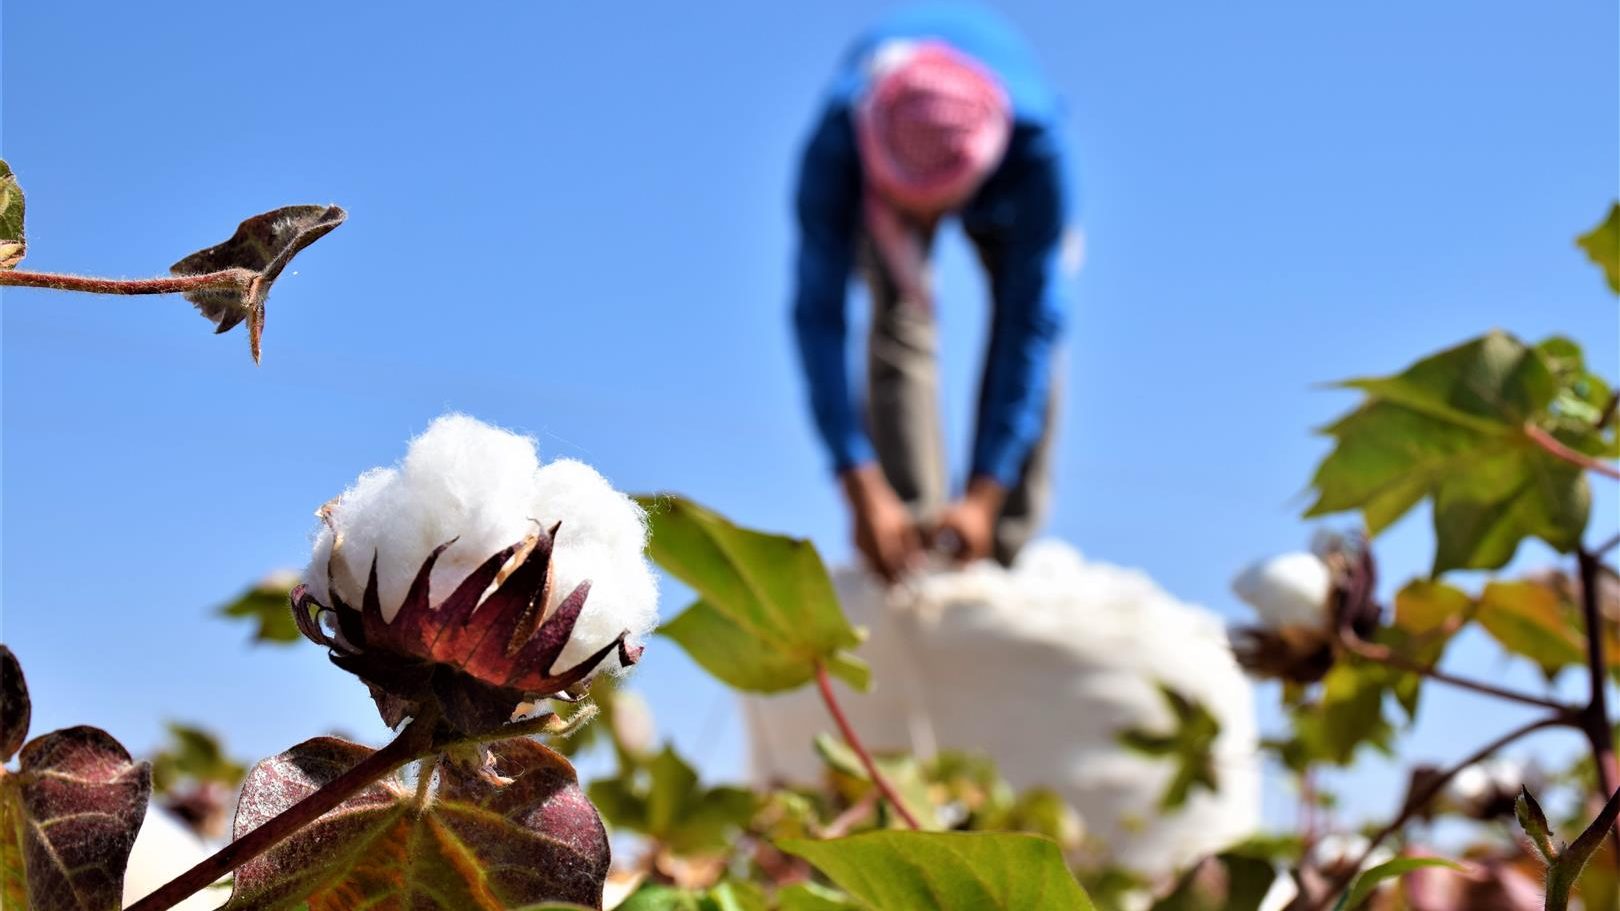 Syrian Cotton: From 1 Million Tons to Below 20,000 tons